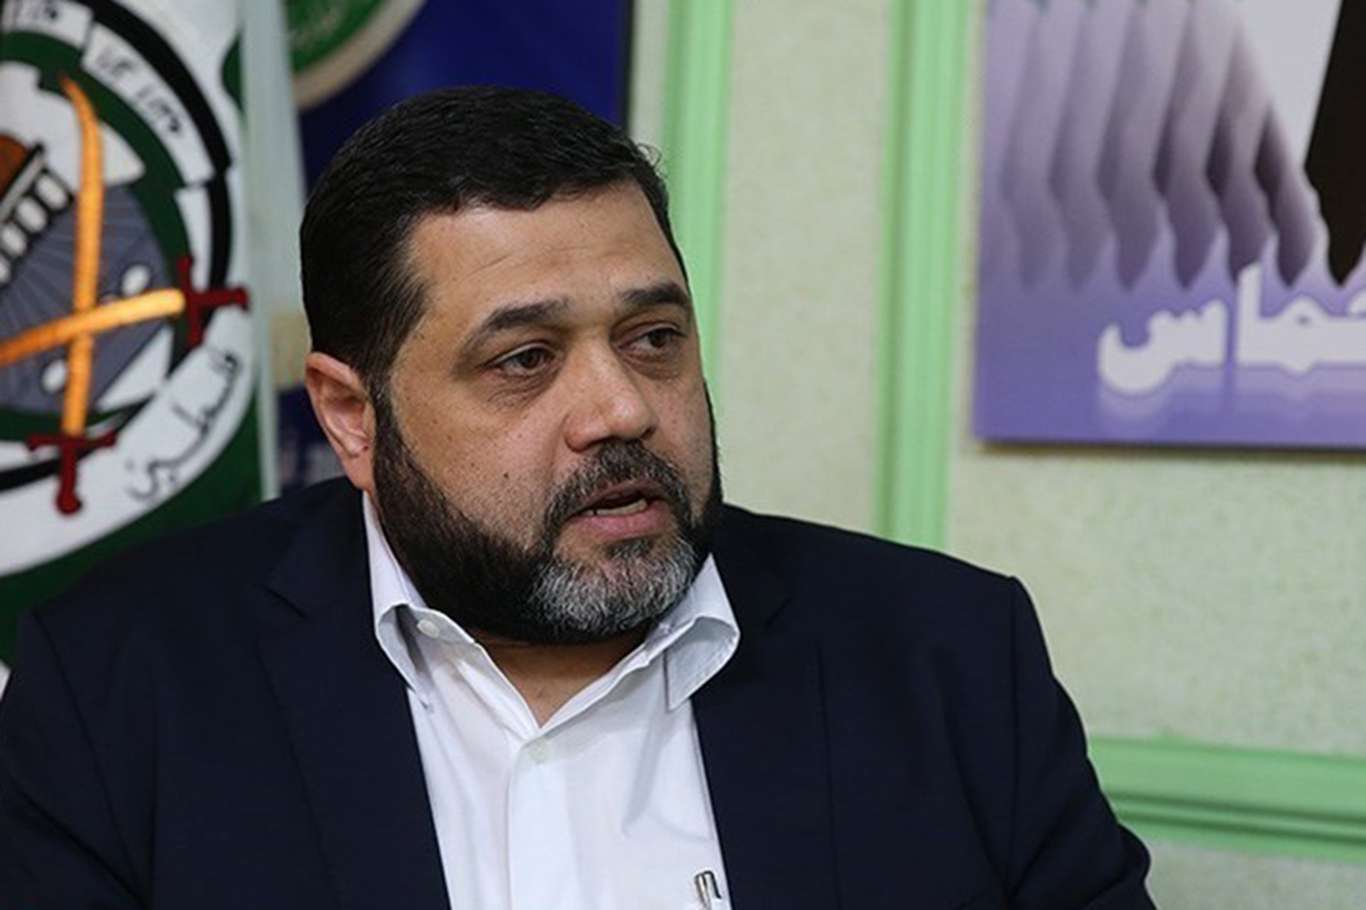 Palestinian factions to meet in Beirut as scheduled, HAMAS says